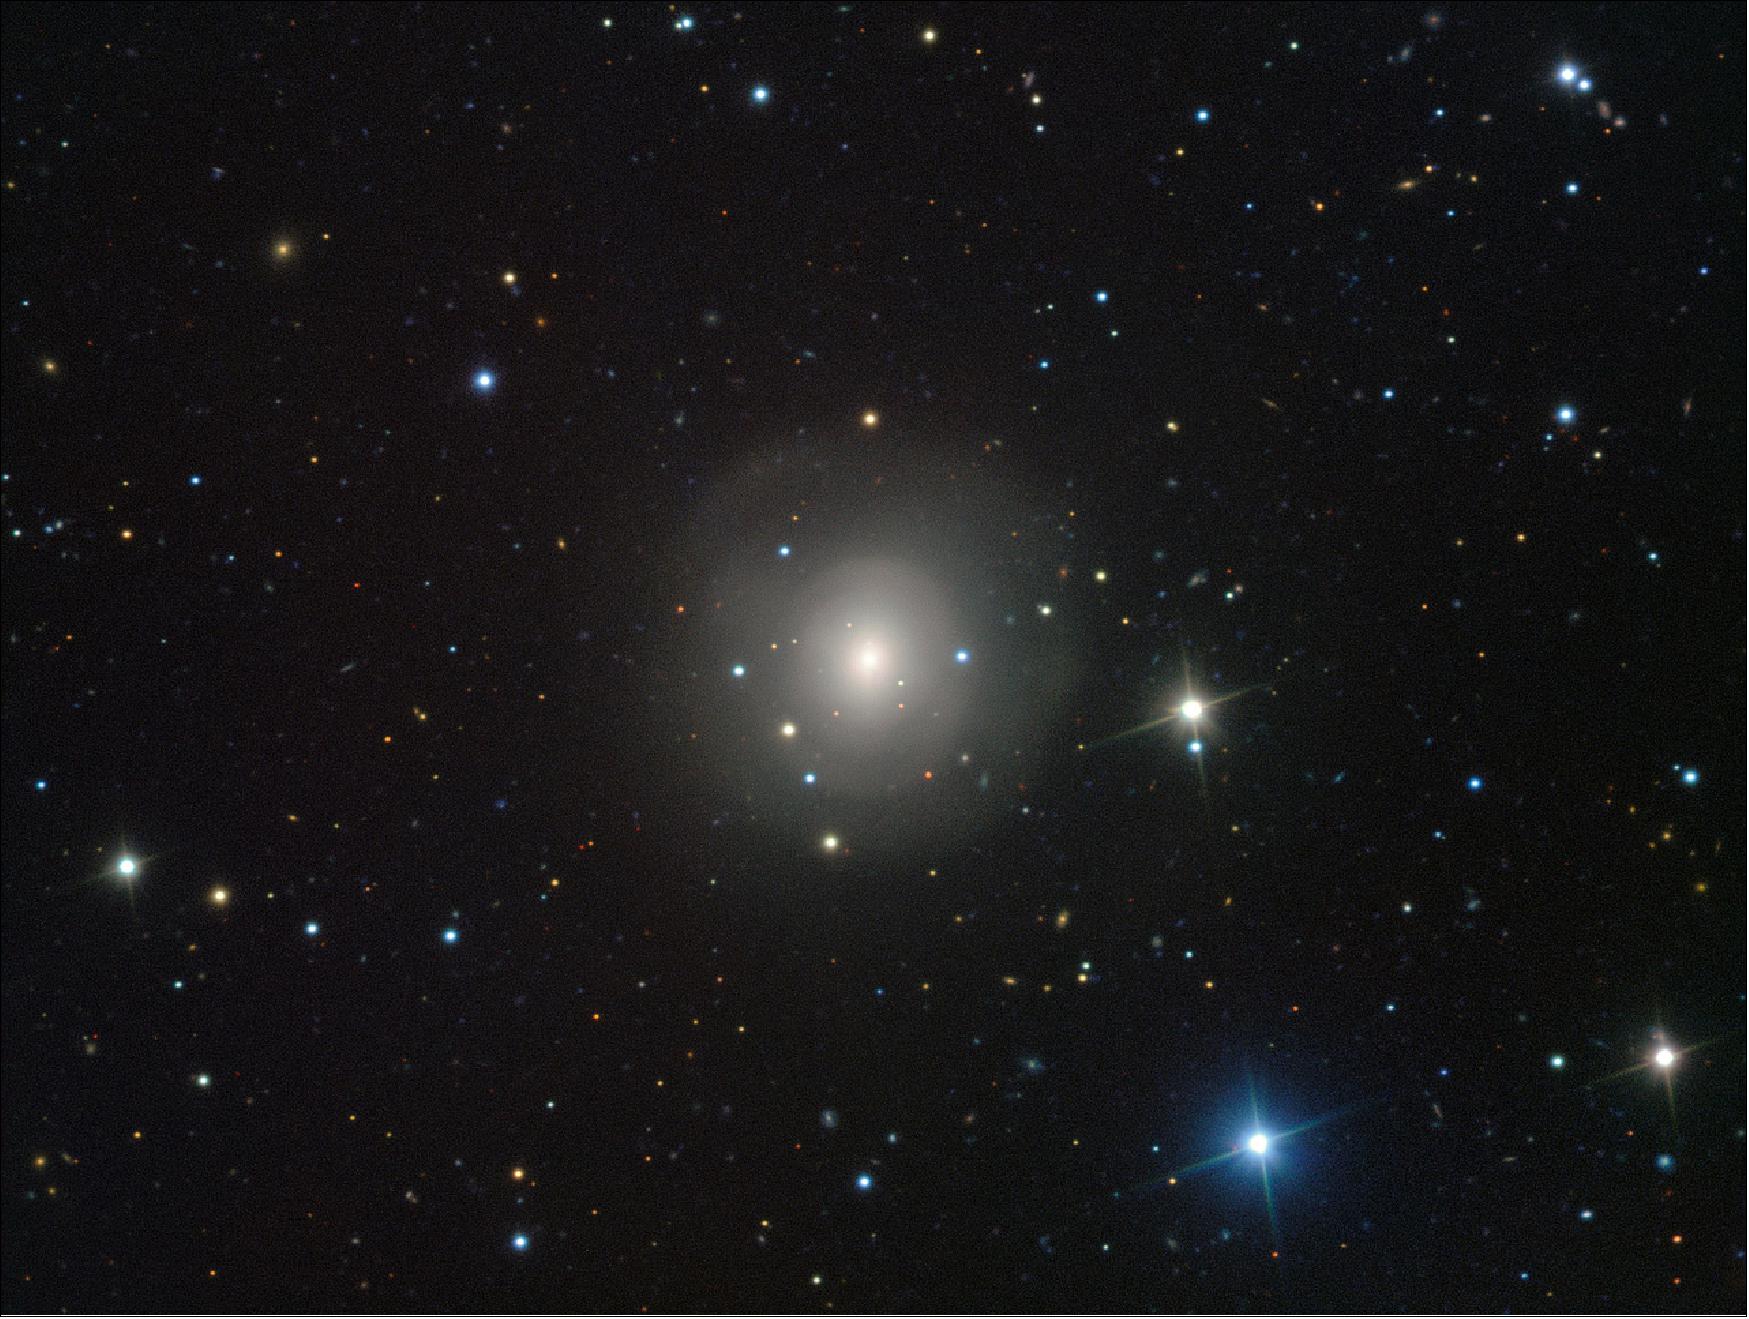 Figure 83: The elliptical galaxy NGC 4993, about 130 million light-years from Earth, viewed with the VIMOS instrument on the European Southern Observatory's Very Large Telescope in Chile. After the almost simultaneous detection of gravitational waves by the LIGO/Virgo collaboration and of a gamma-ray burst by ESA's INTEGRAL and NASA's Fermi satellites, a large number of ground and space telescopes started searching for the source in the sky (image credit: ESO/A. J. Levan, N.R. Tanvir, CC BY 4.0, Ref. 88)